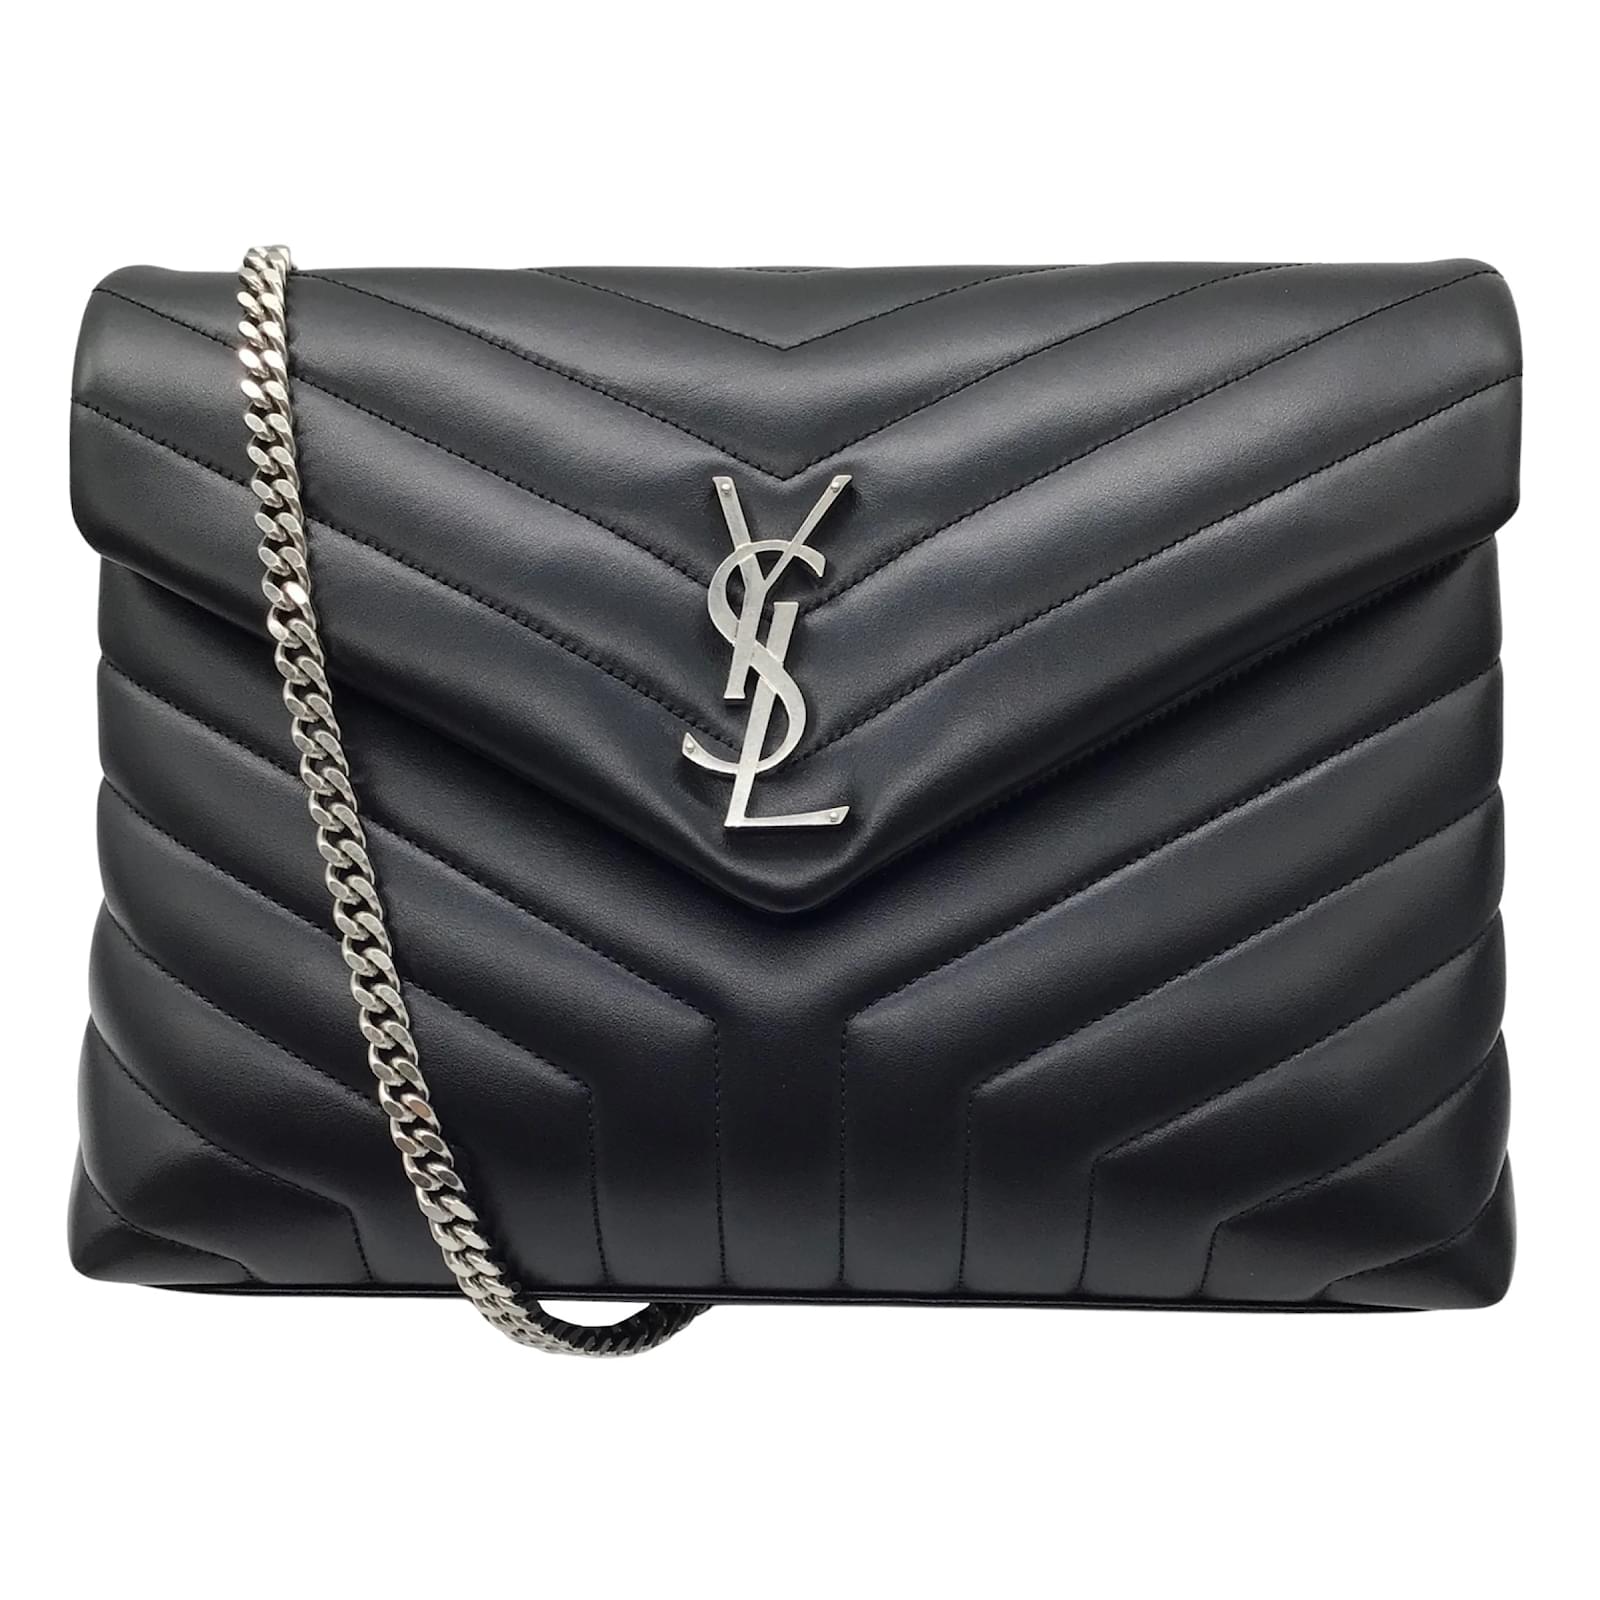 MEDIUM LOULOU IN QUILTED LEATHER, Saint Laurent